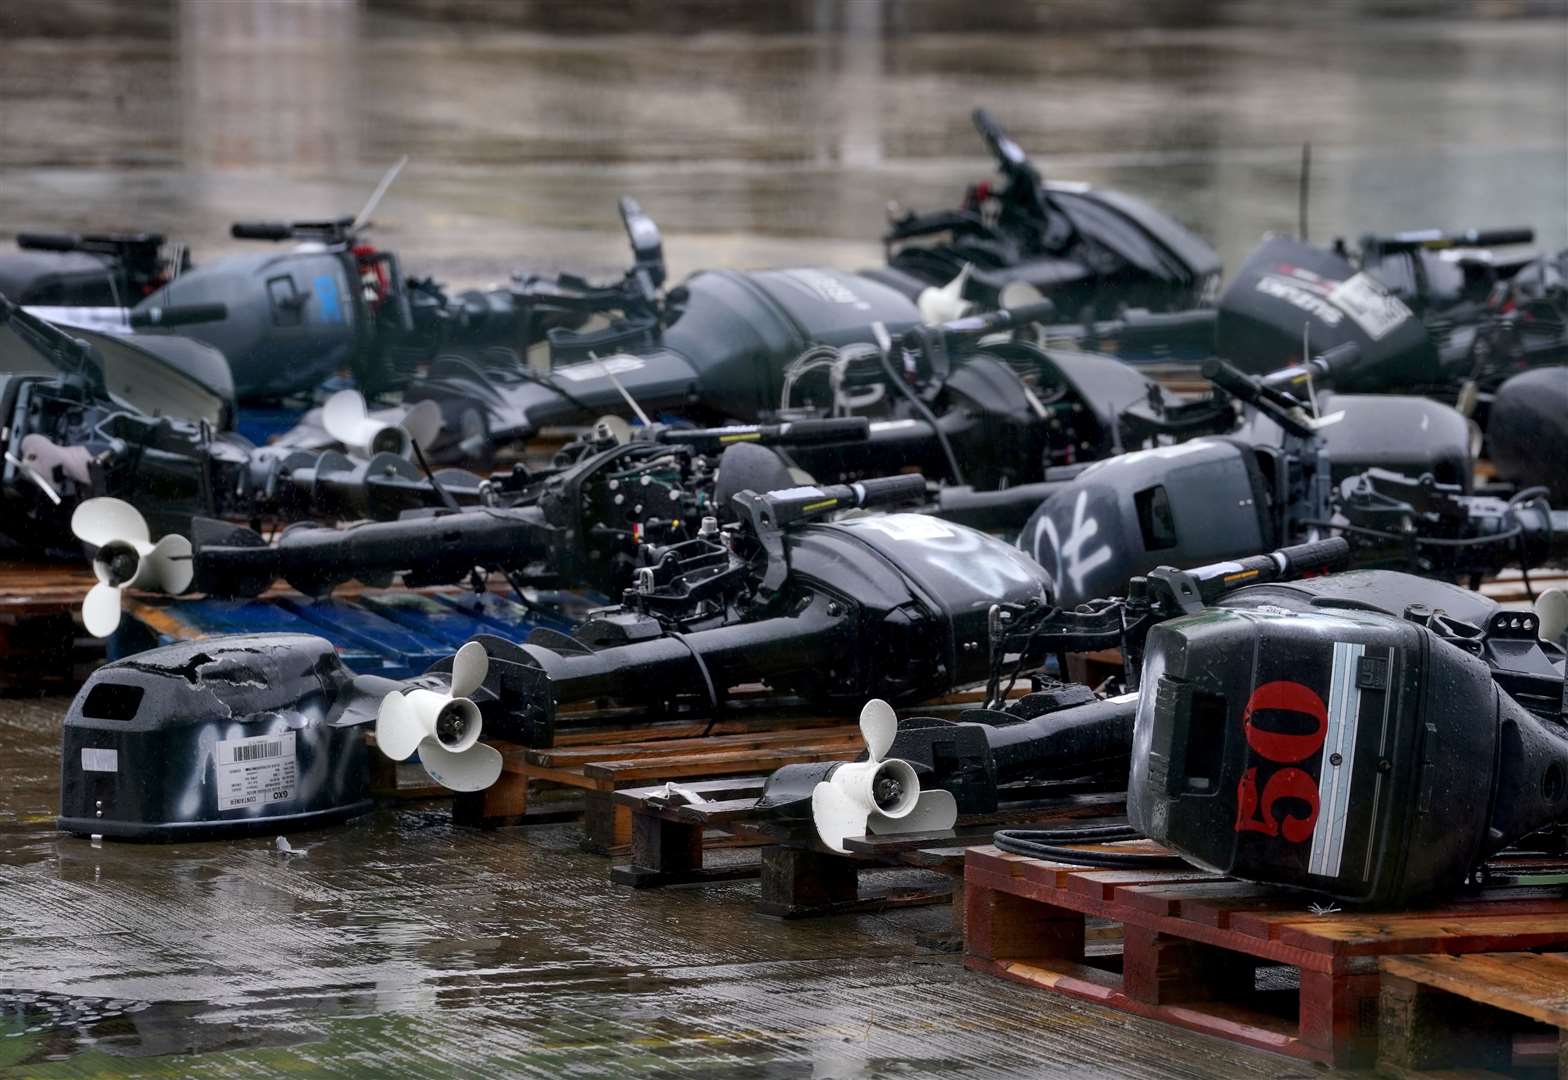 A view of small boats and engines used to cross the Channel (Gareth Fuller/PA)